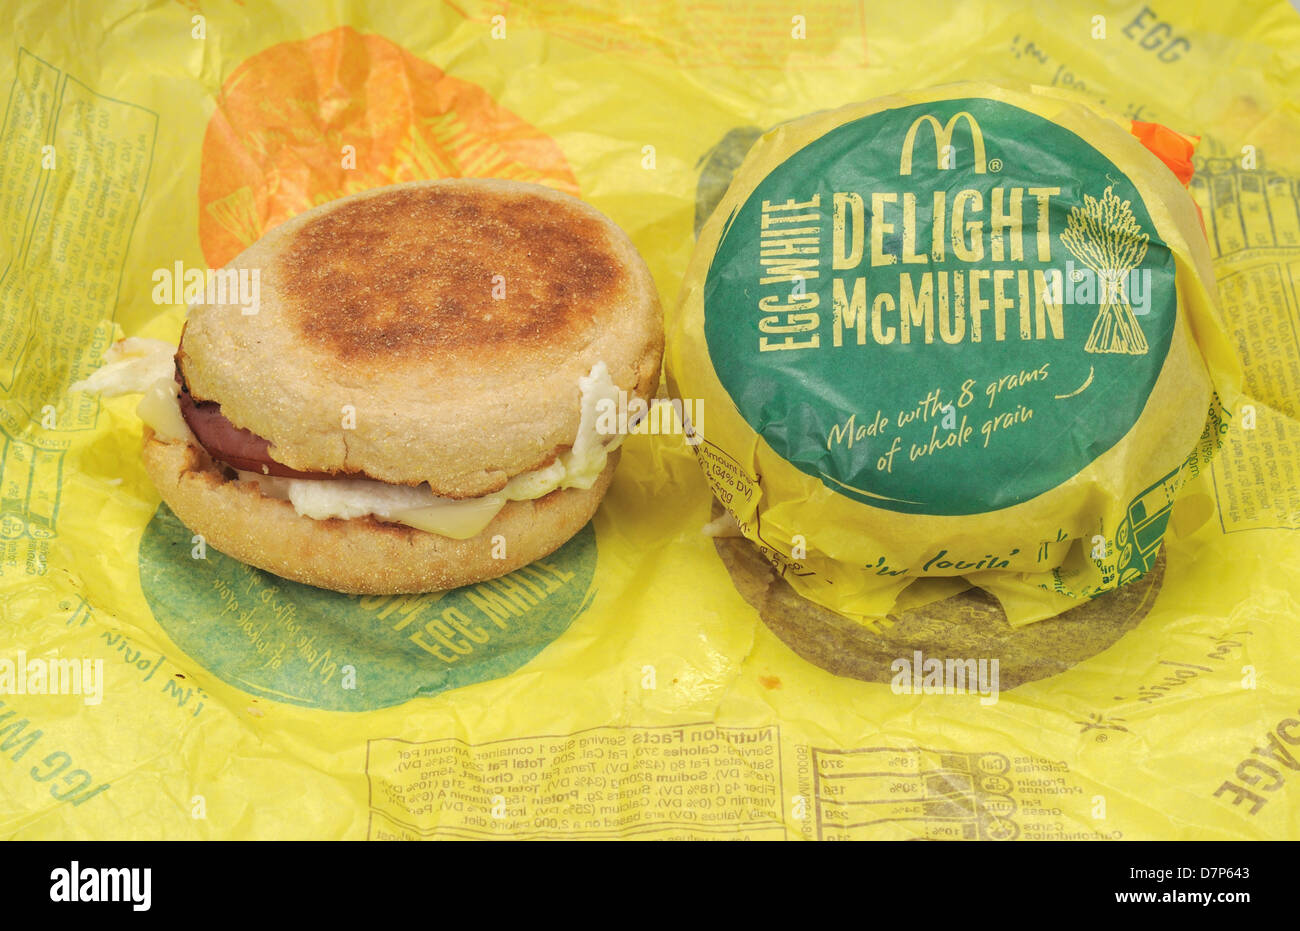 2 McDonald's Egg White Delight McMuffins with Canadian bacon, white cheddar cheese and toasted english muffin on wrapper with 1 wrapped. USA Stock Photo